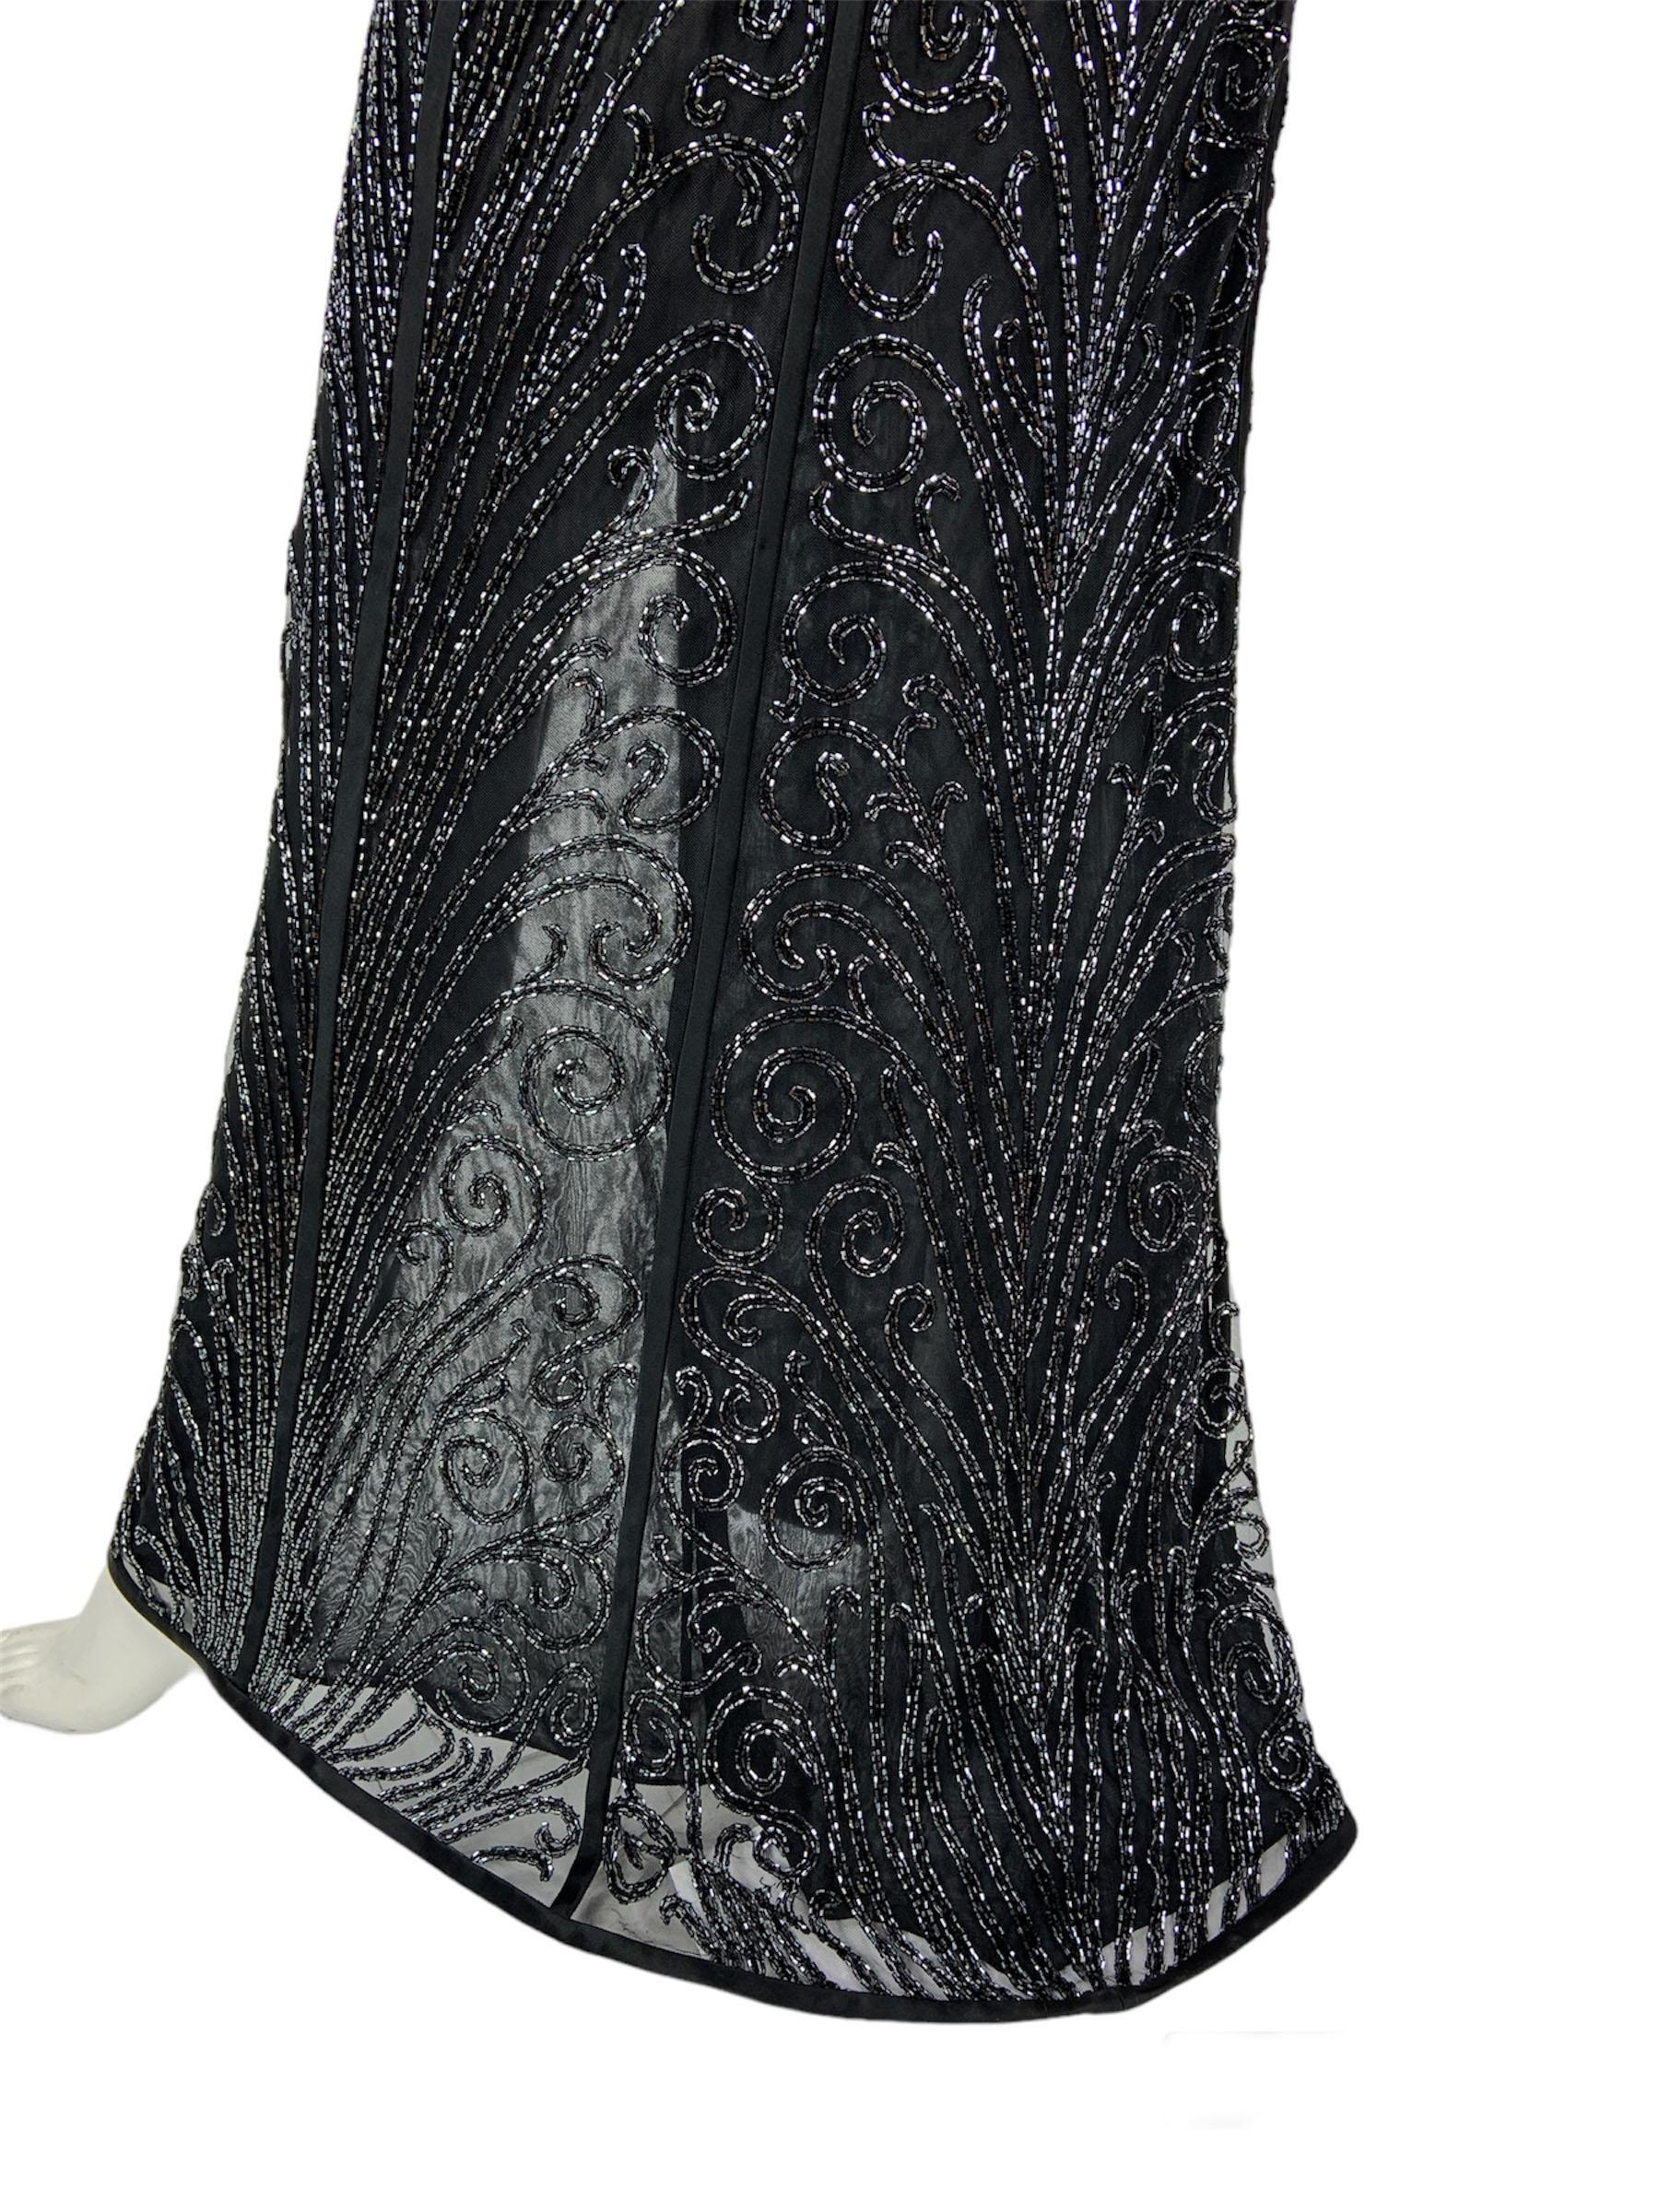 Vintage Bob Mackie Black Fully Beaded Tulle Dress Gown US size 12 NWT For Sale 6